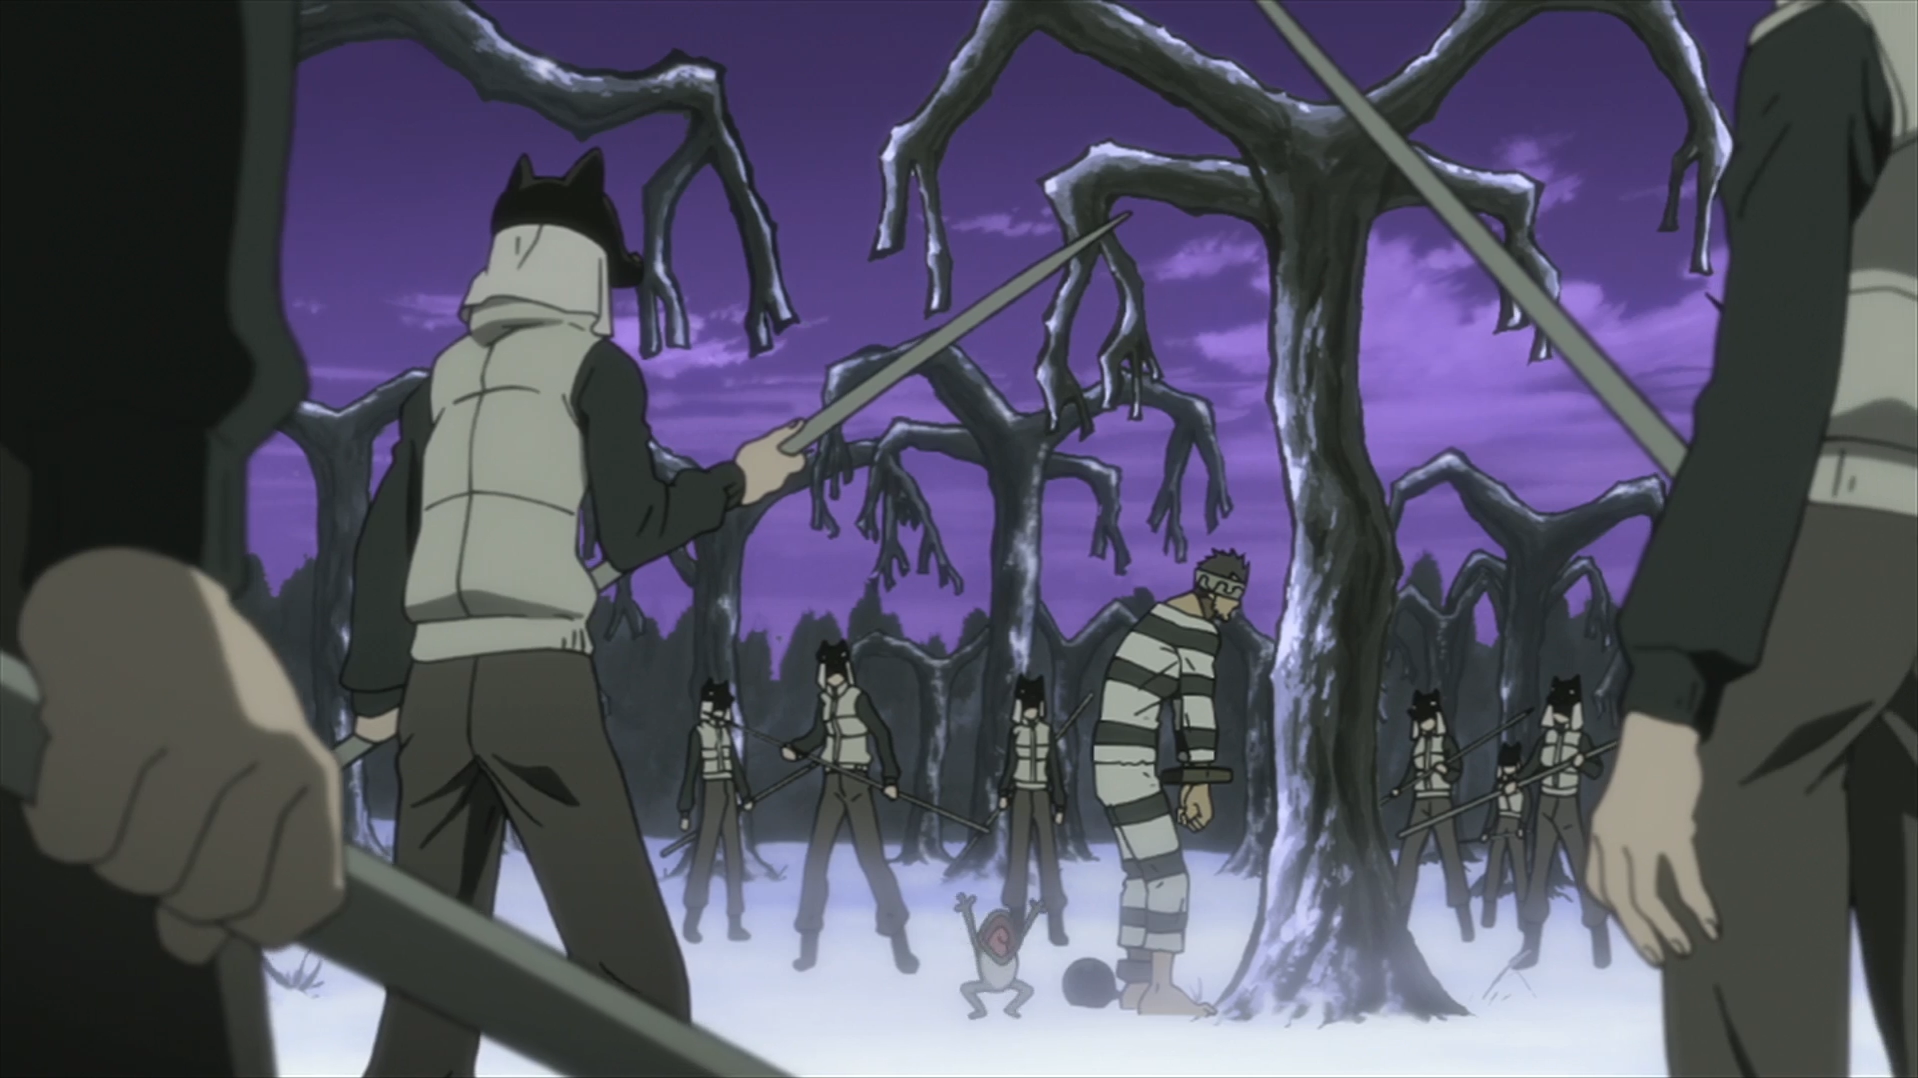 Soul Eater Episode 13 Hd   Prison Guards Surround Free And Eruka.png - Prison, Transparent background PNG HD thumbnail